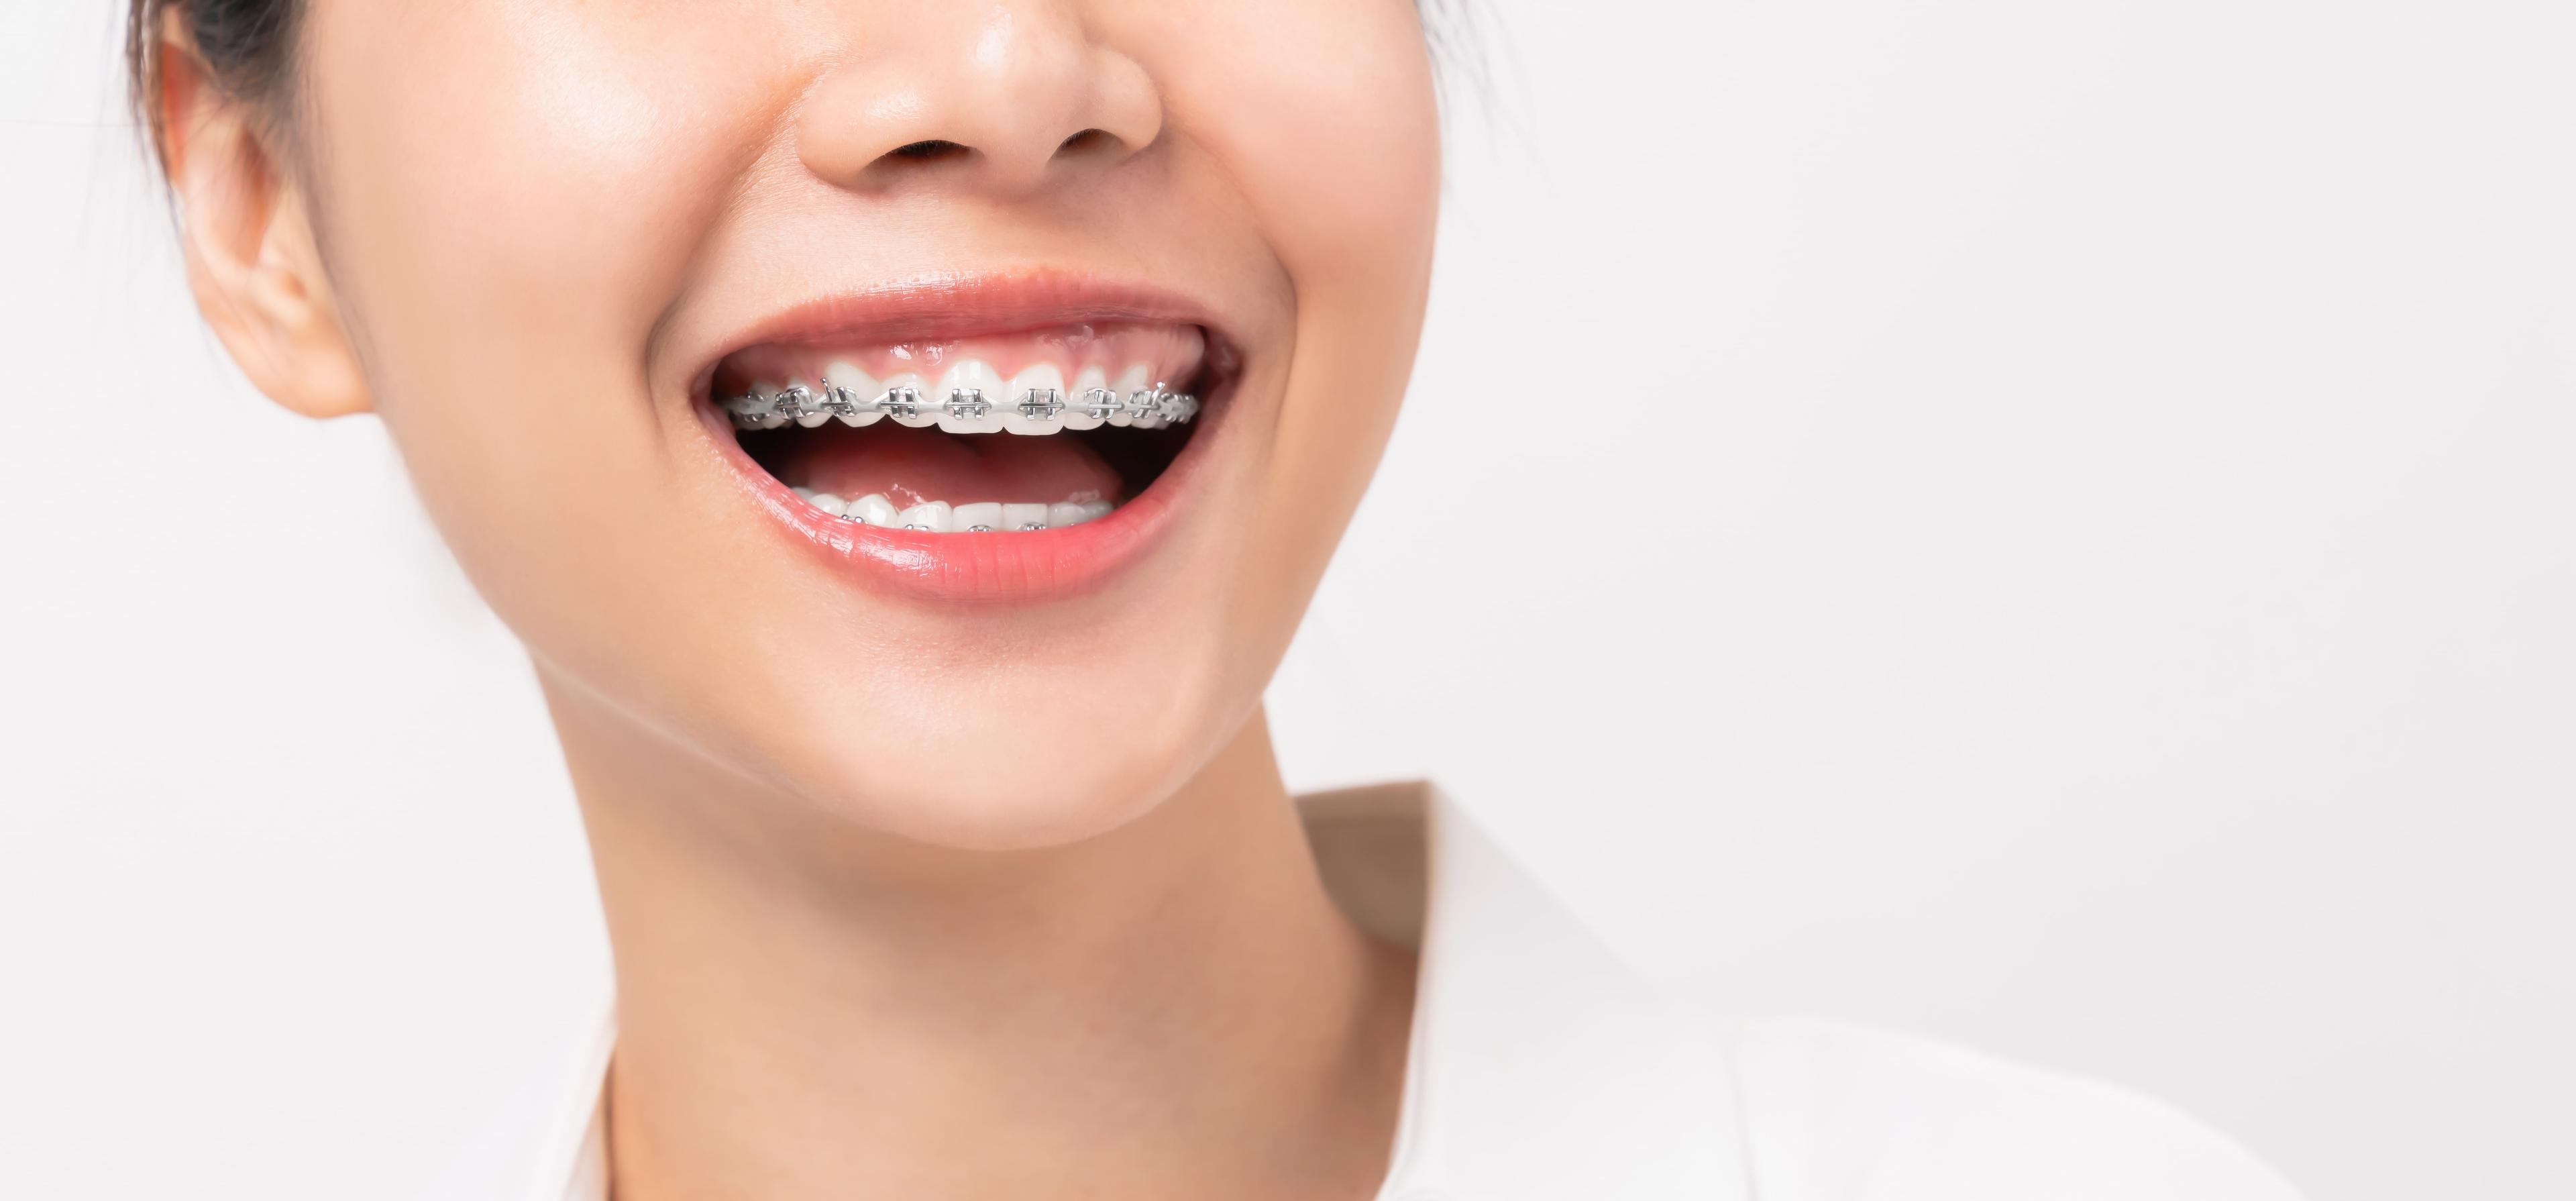 6 Tips To Make Wearing Braces More Comfortable